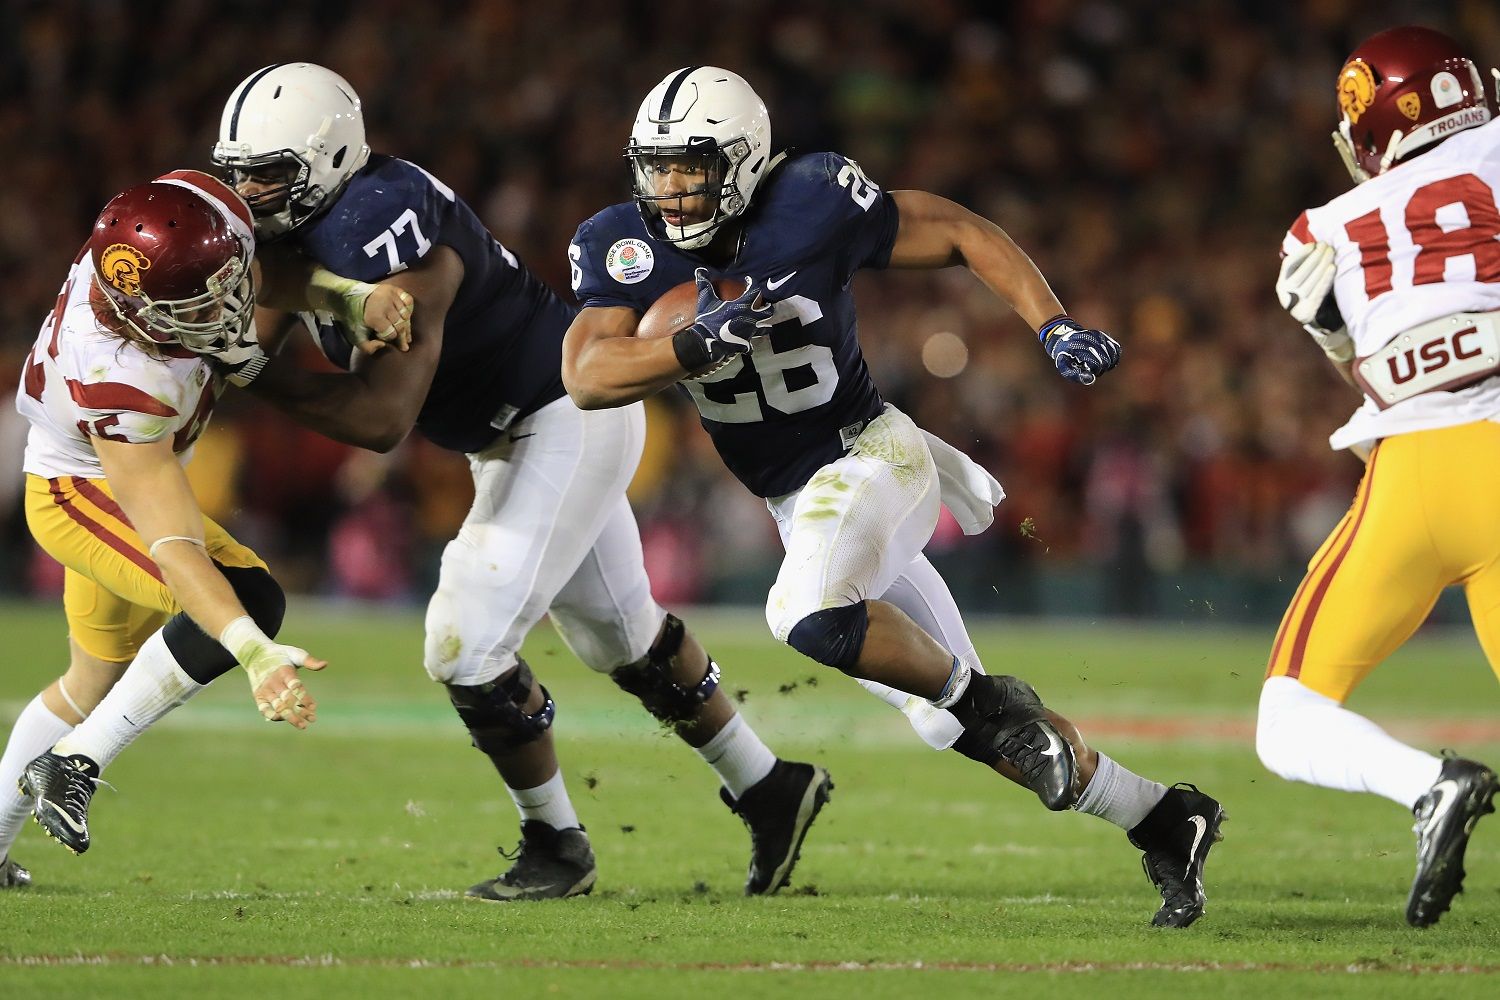 PASADENA, CA - JANUARY 02:  Running back Saquon Barkley #26 of the Penn State Nittany Lions runs with the ball against the USC Trojans during the 2017 Rose Bowl Game presented by Northwestern Mutual at the Rose Bowl on January 2, 2017 in Pasadena, California.  (Photo by Sean M. Haffey/Getty Images)